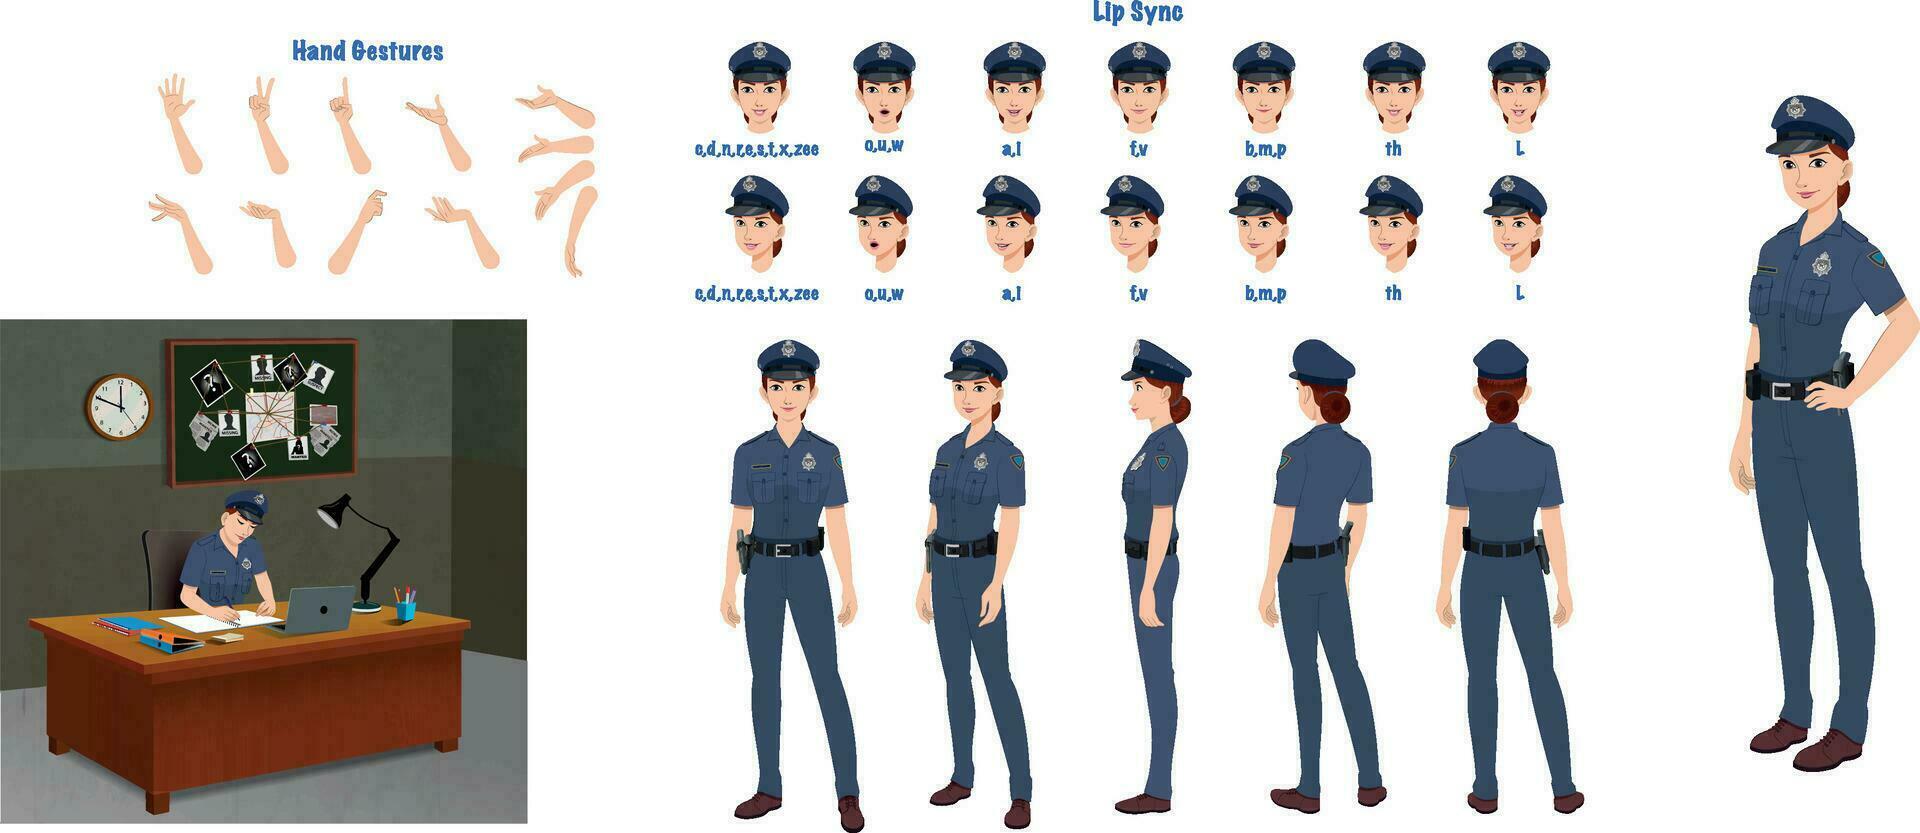 A policewoman, cop model sheet. Police creation set. Police inspector turnaround sheet, hand gestures, lip sync vector